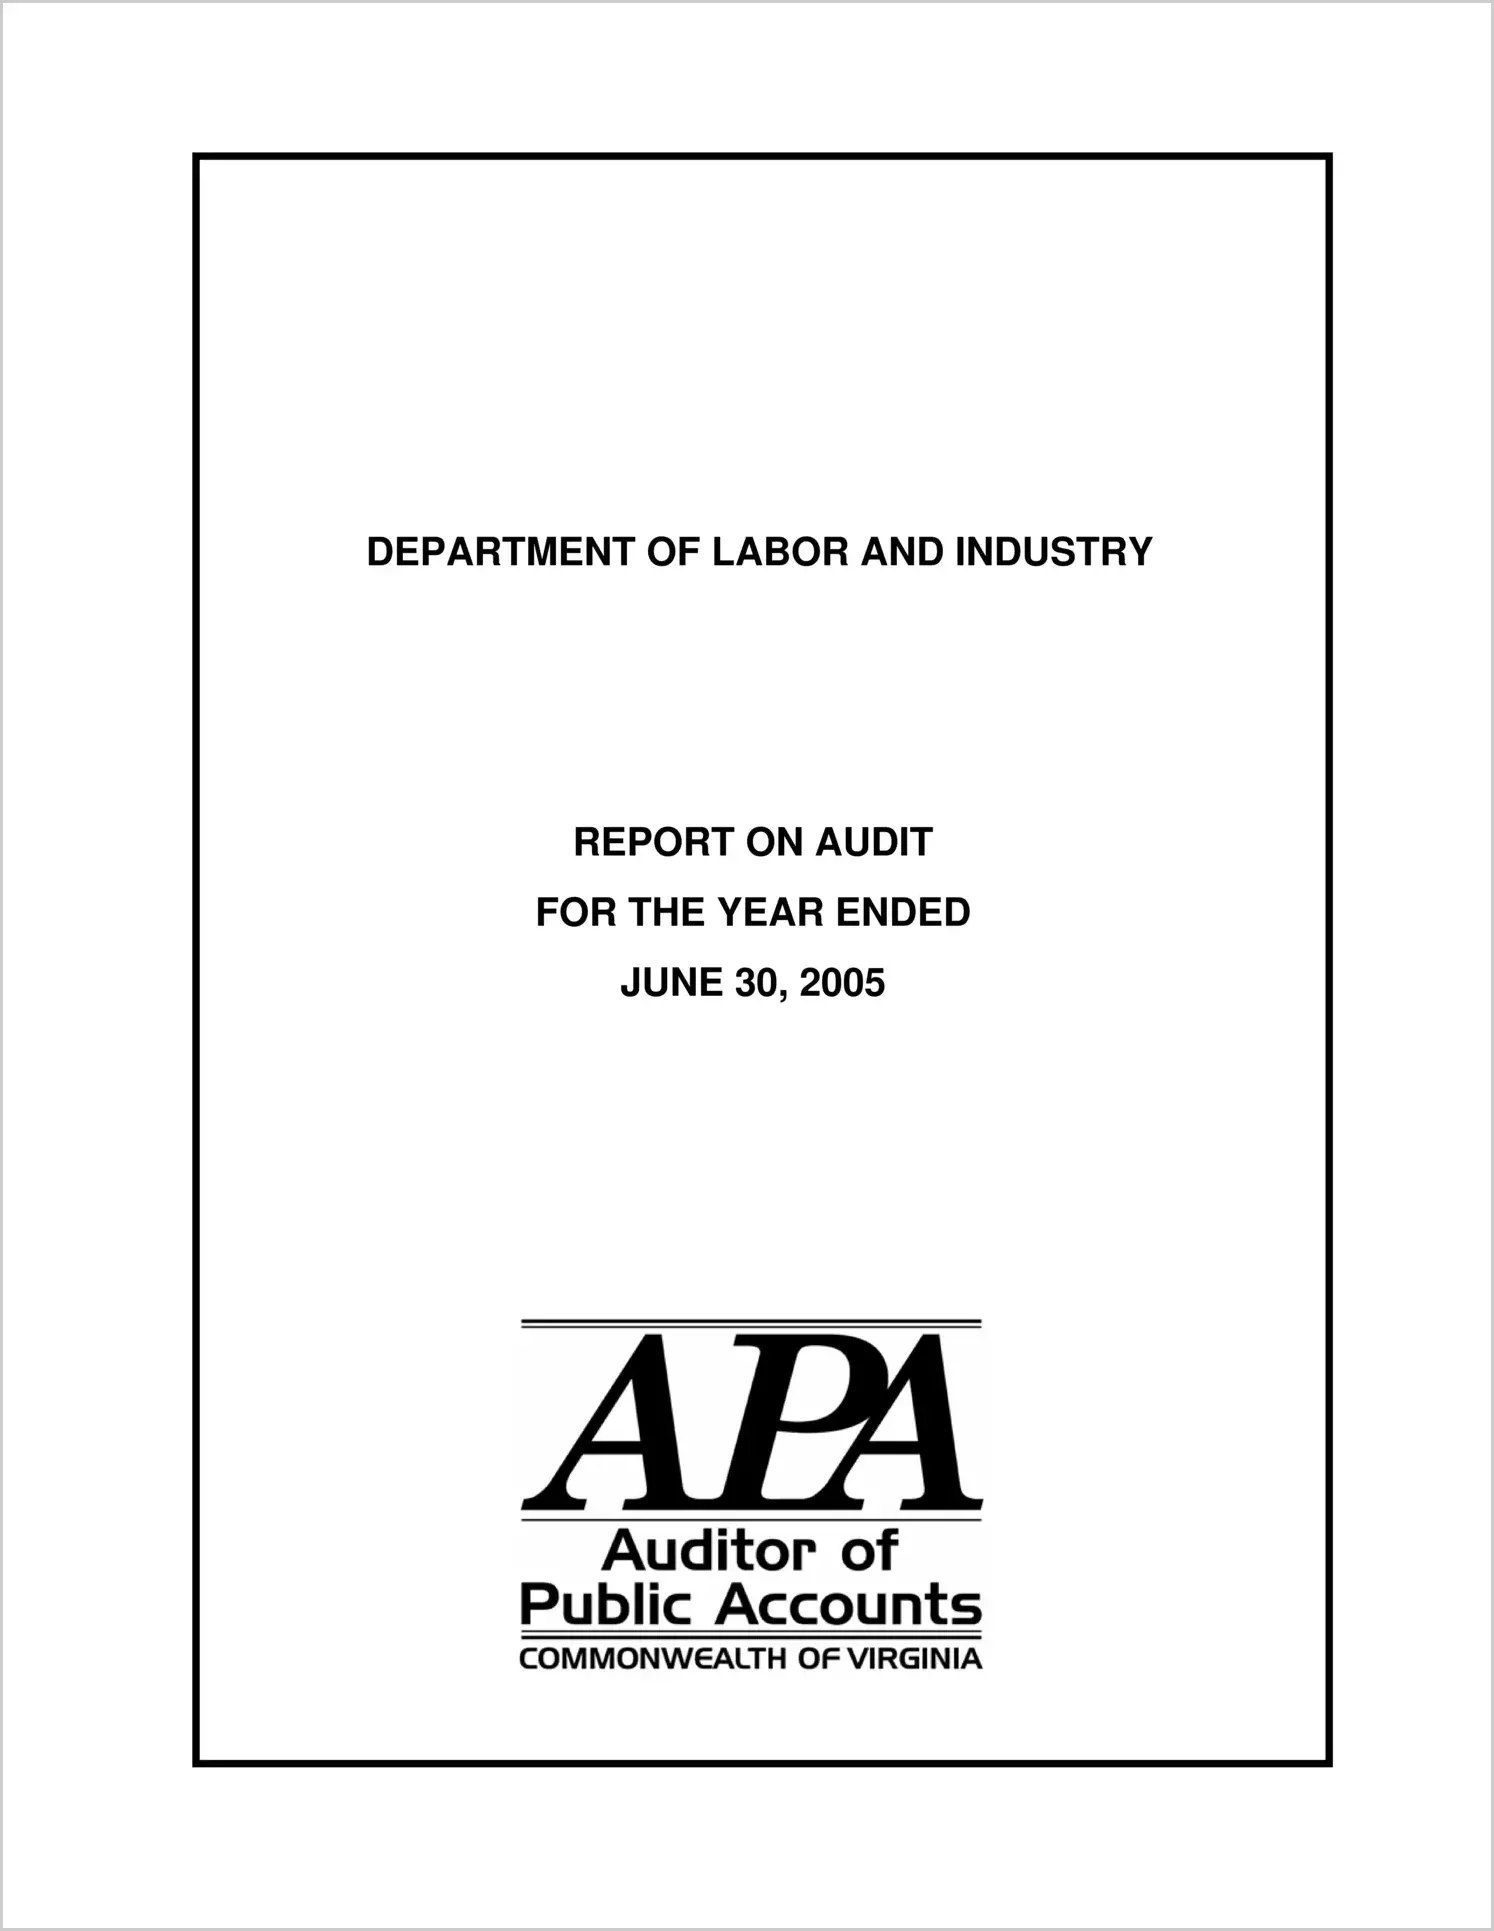 Department of Labor and Industry for the year ended June 30, 2005